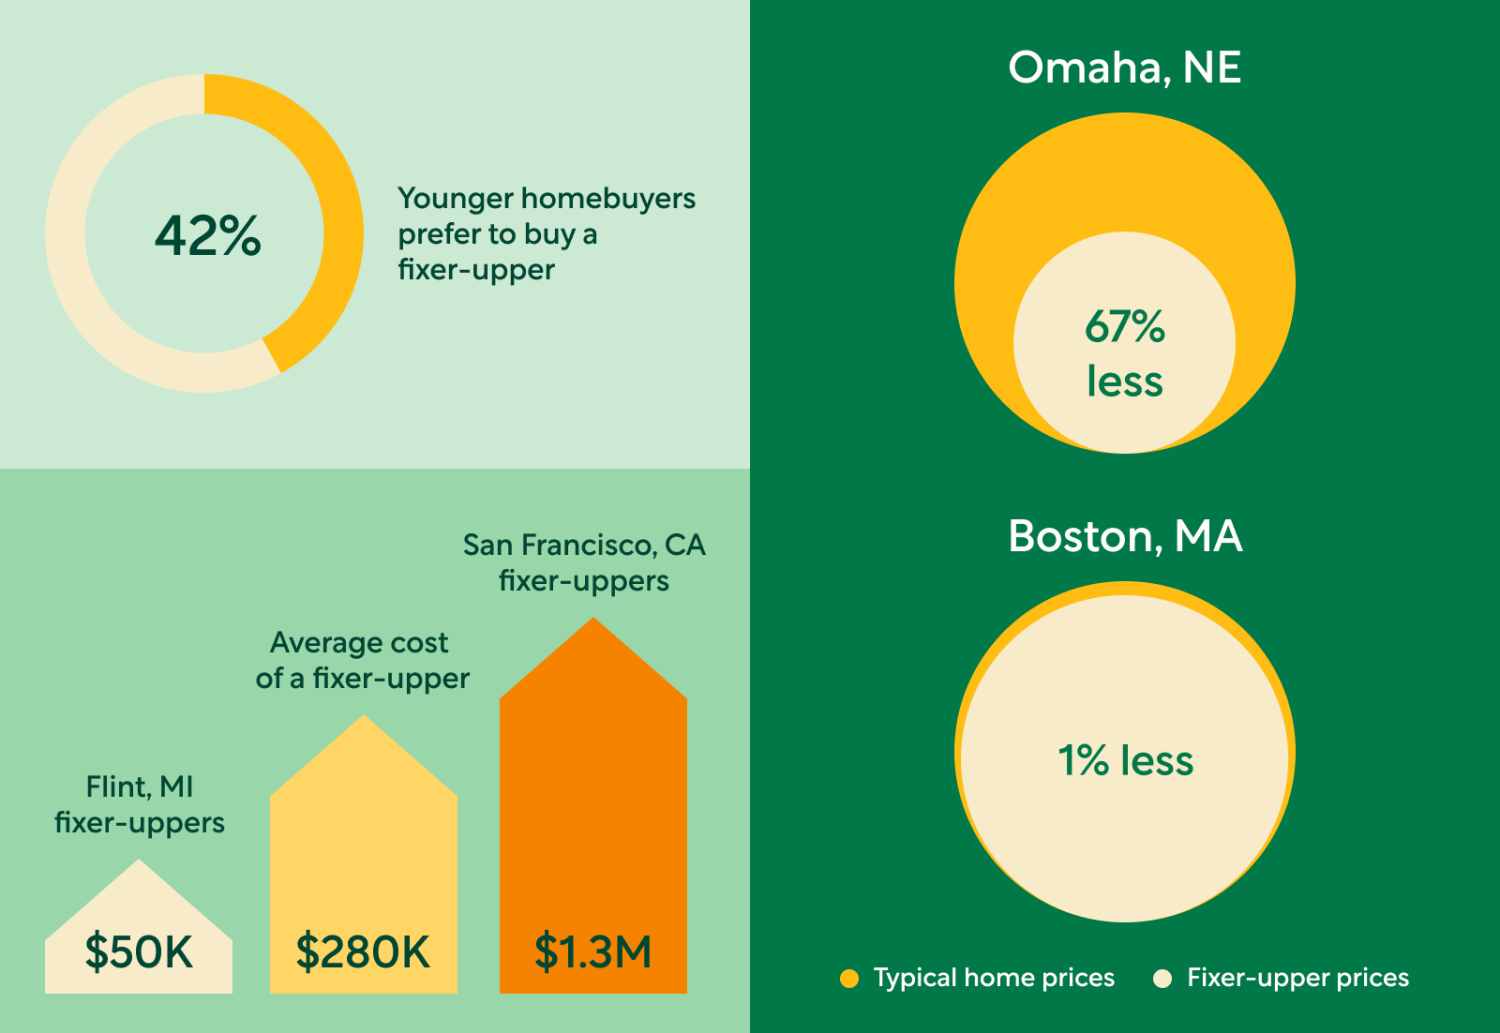 Multi-colored Chart Showing: Young Homebuyer Preference To Buy Fixer Uppers;  Typical Home Prices Compared to Fixer Uppers in Omaha and Boston; Average Fixer Upper Costs in Flint, MI, and San Francisco, CA